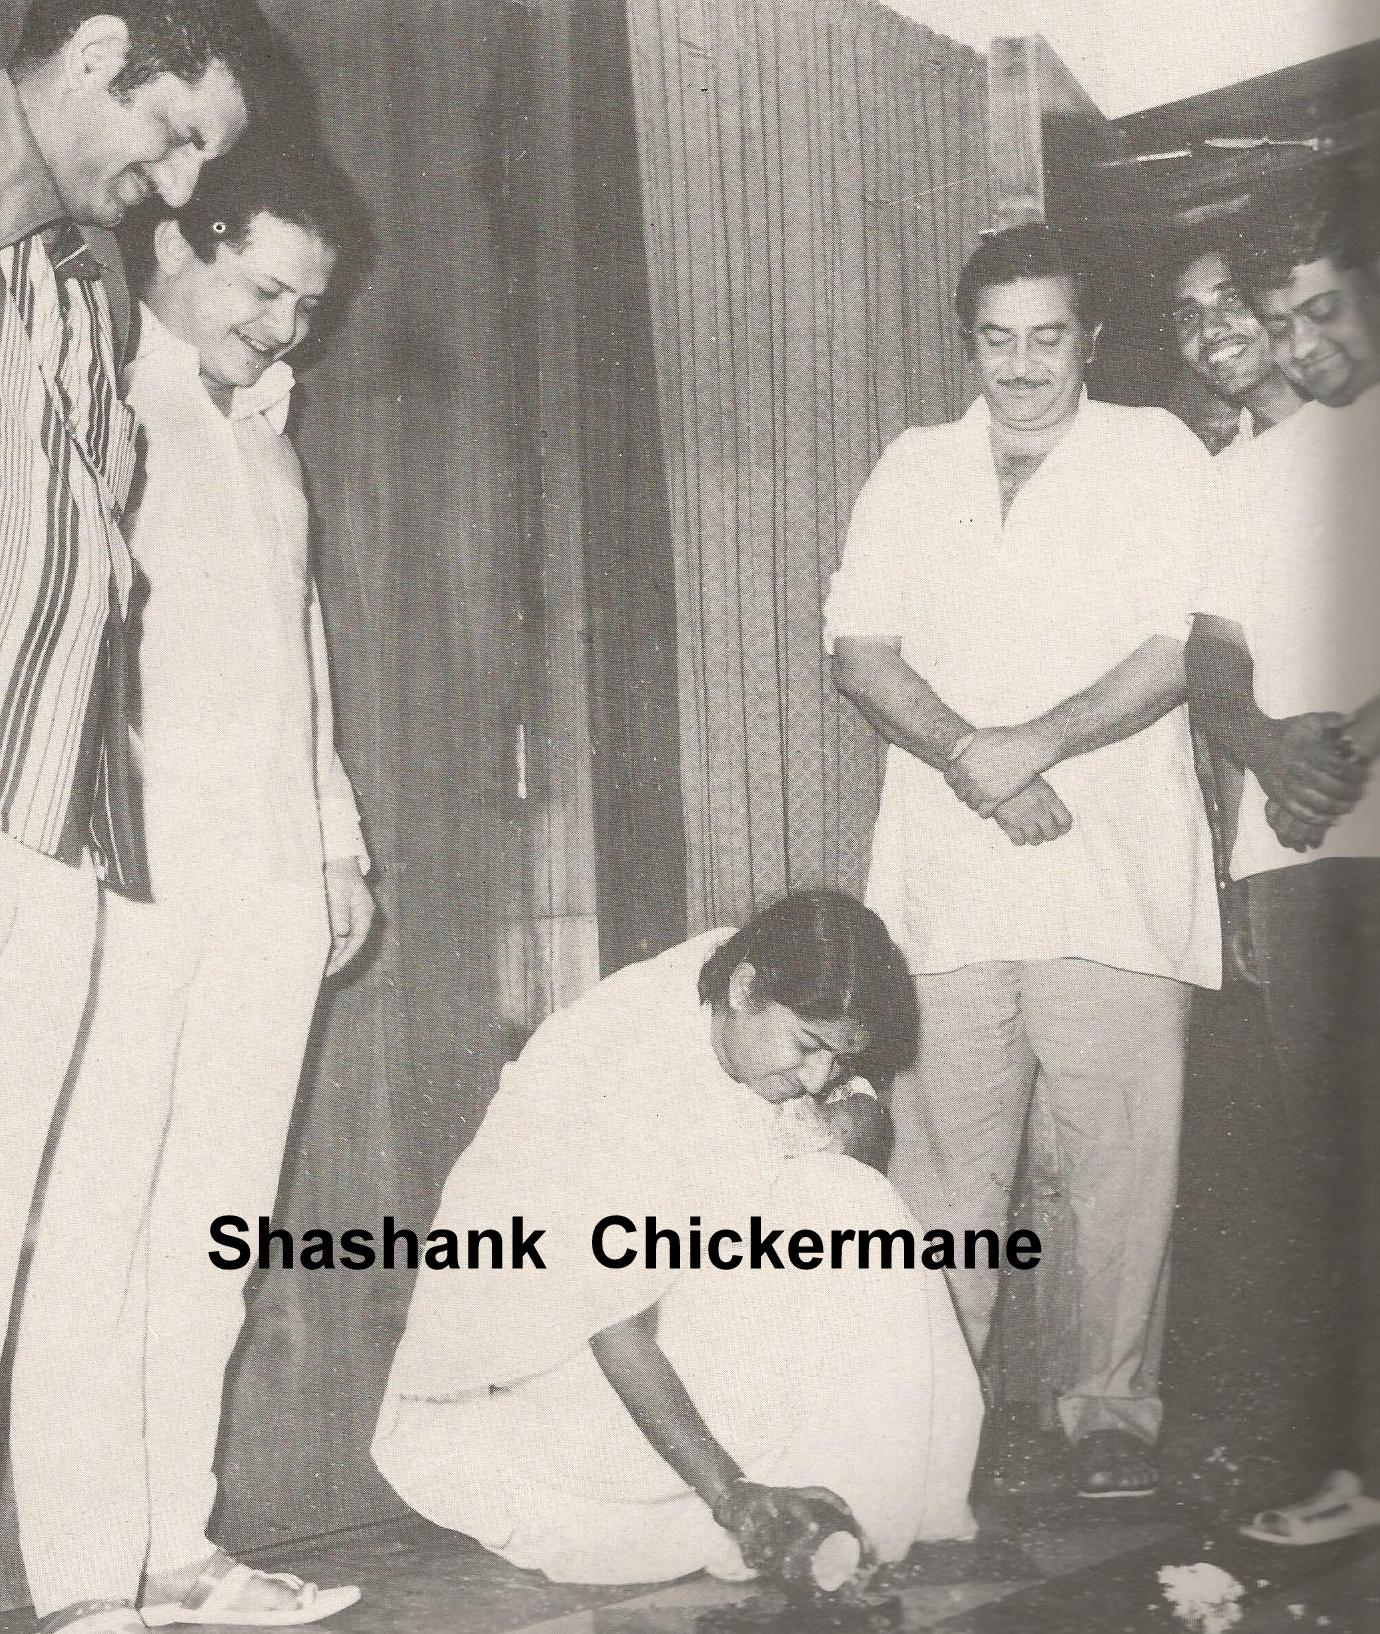 Lata breaking coconut in the muhurat of a song recording with Laxmikant Pyarelal, Raj Kapoor & others in the recording studio